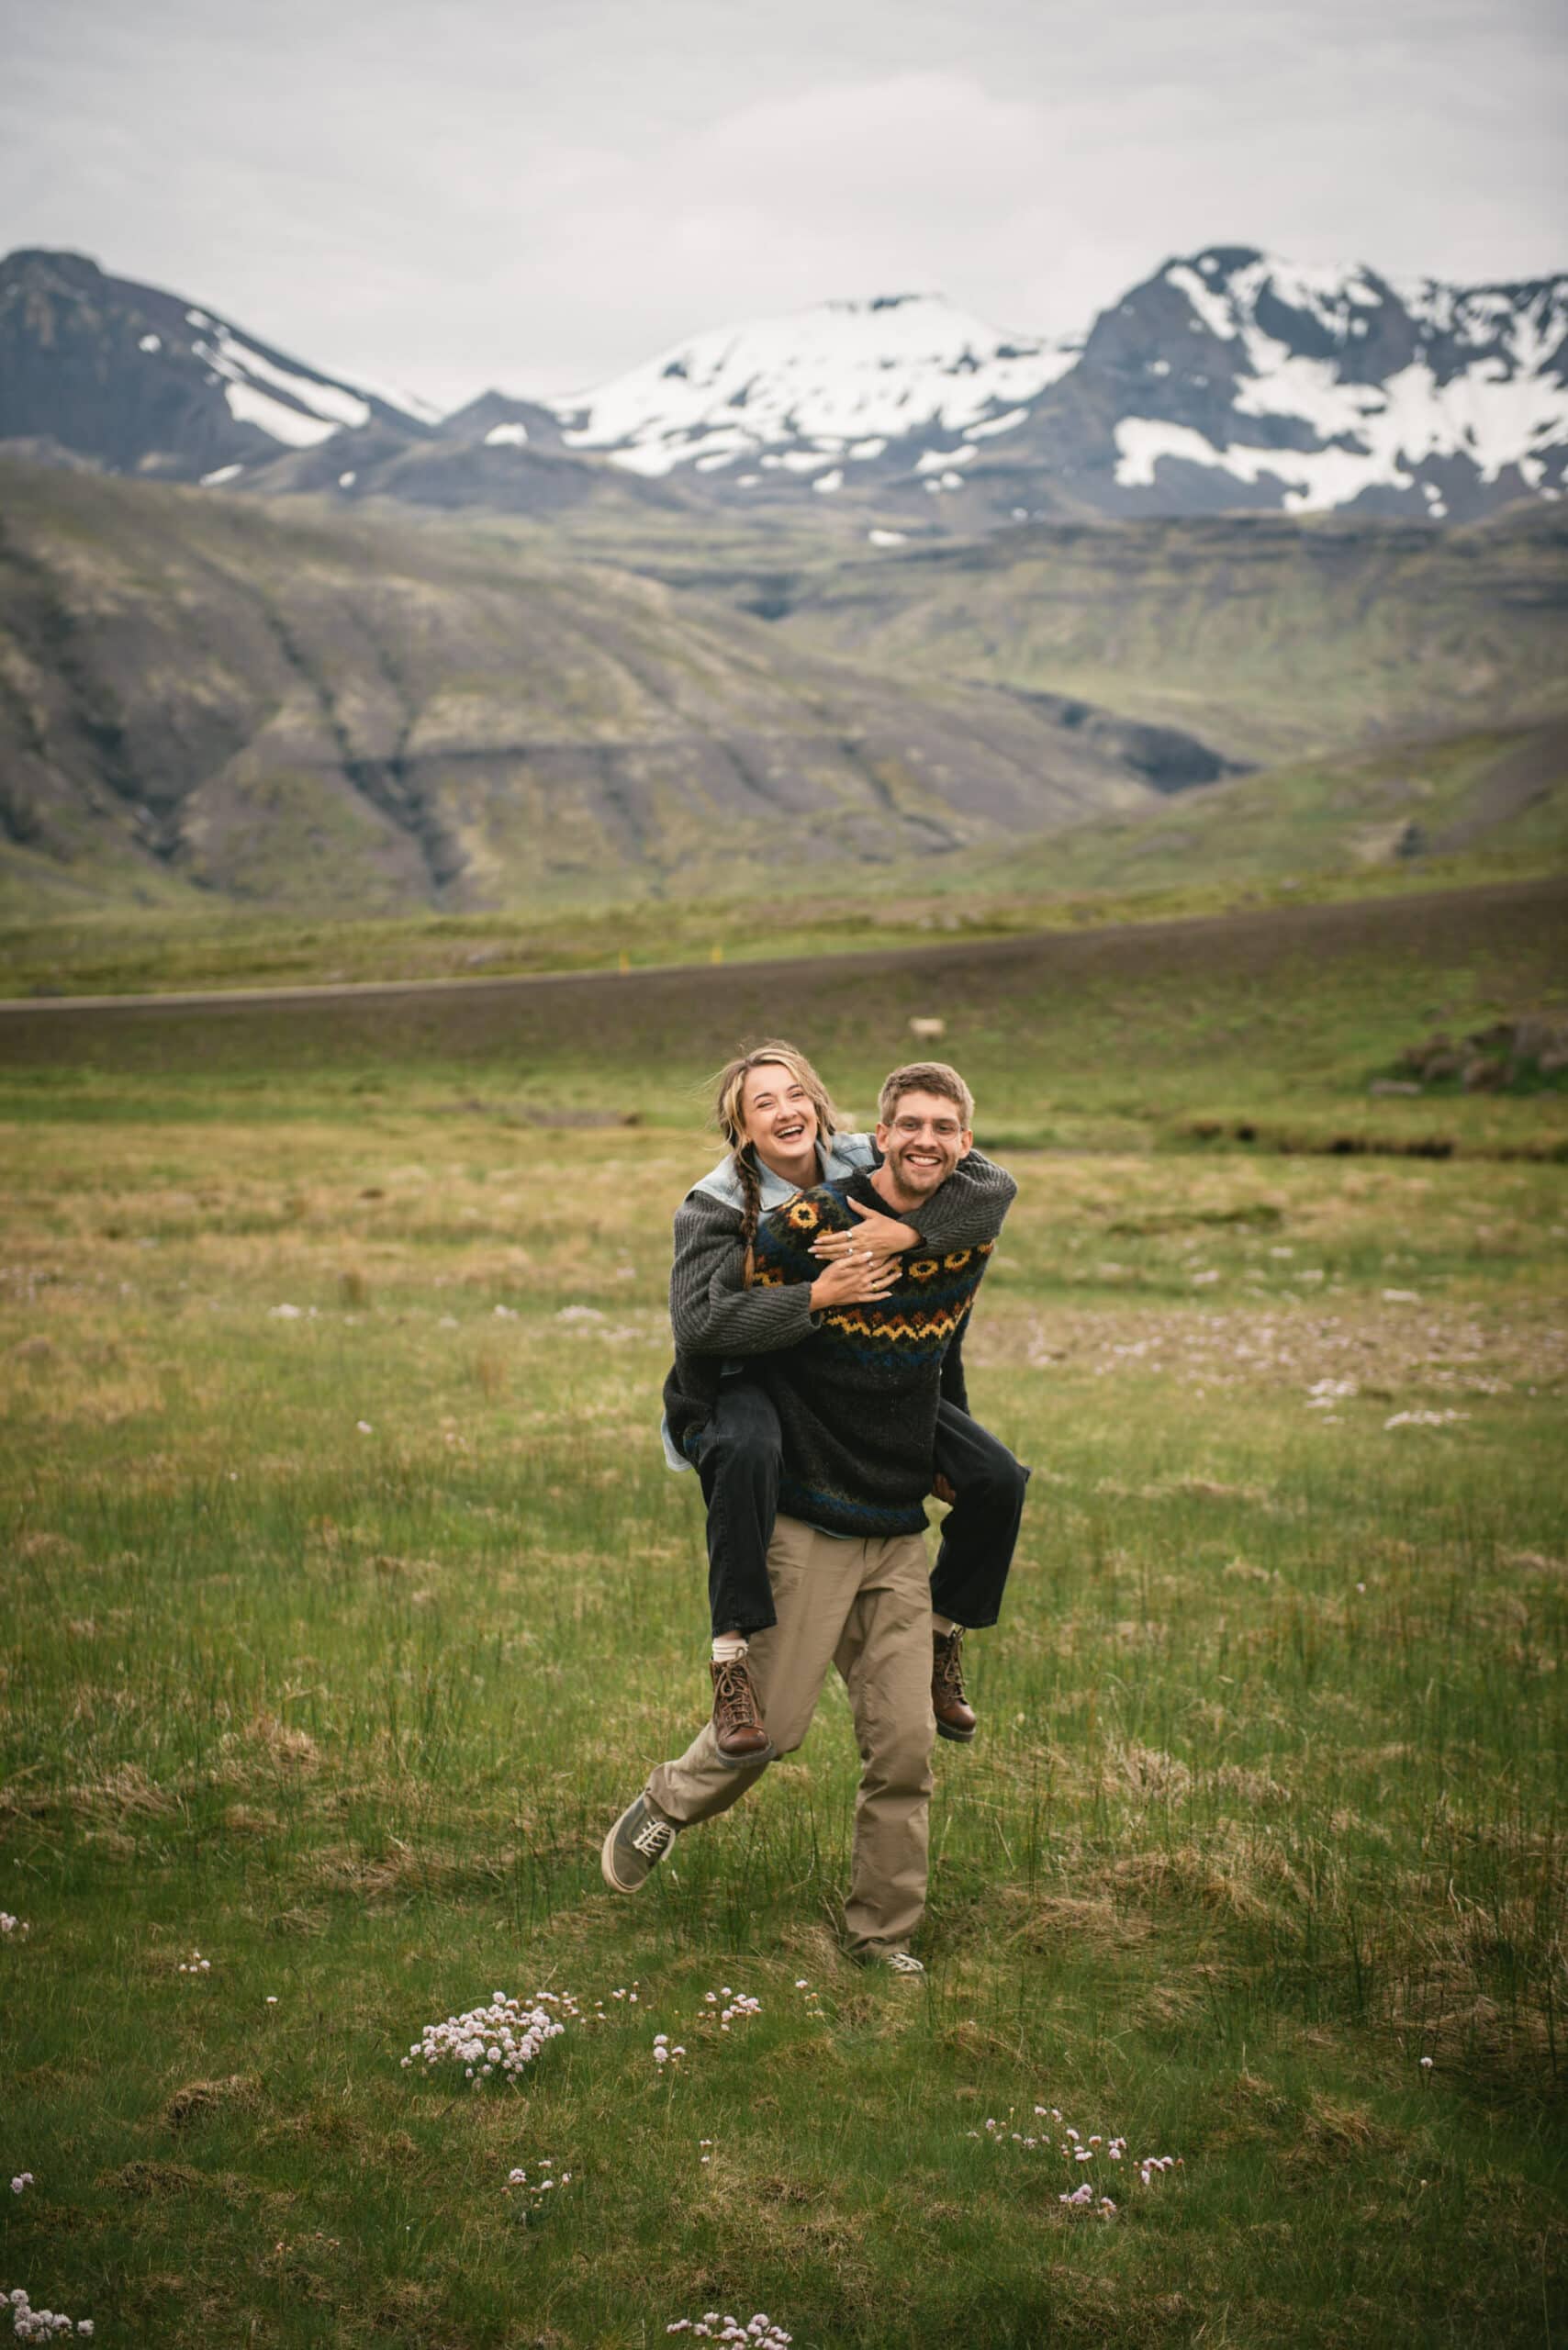 Laughing echoes against the untamed backdrop of the Westfjords, as they dance and play, letting the whims of the land inspire their love's adventure.